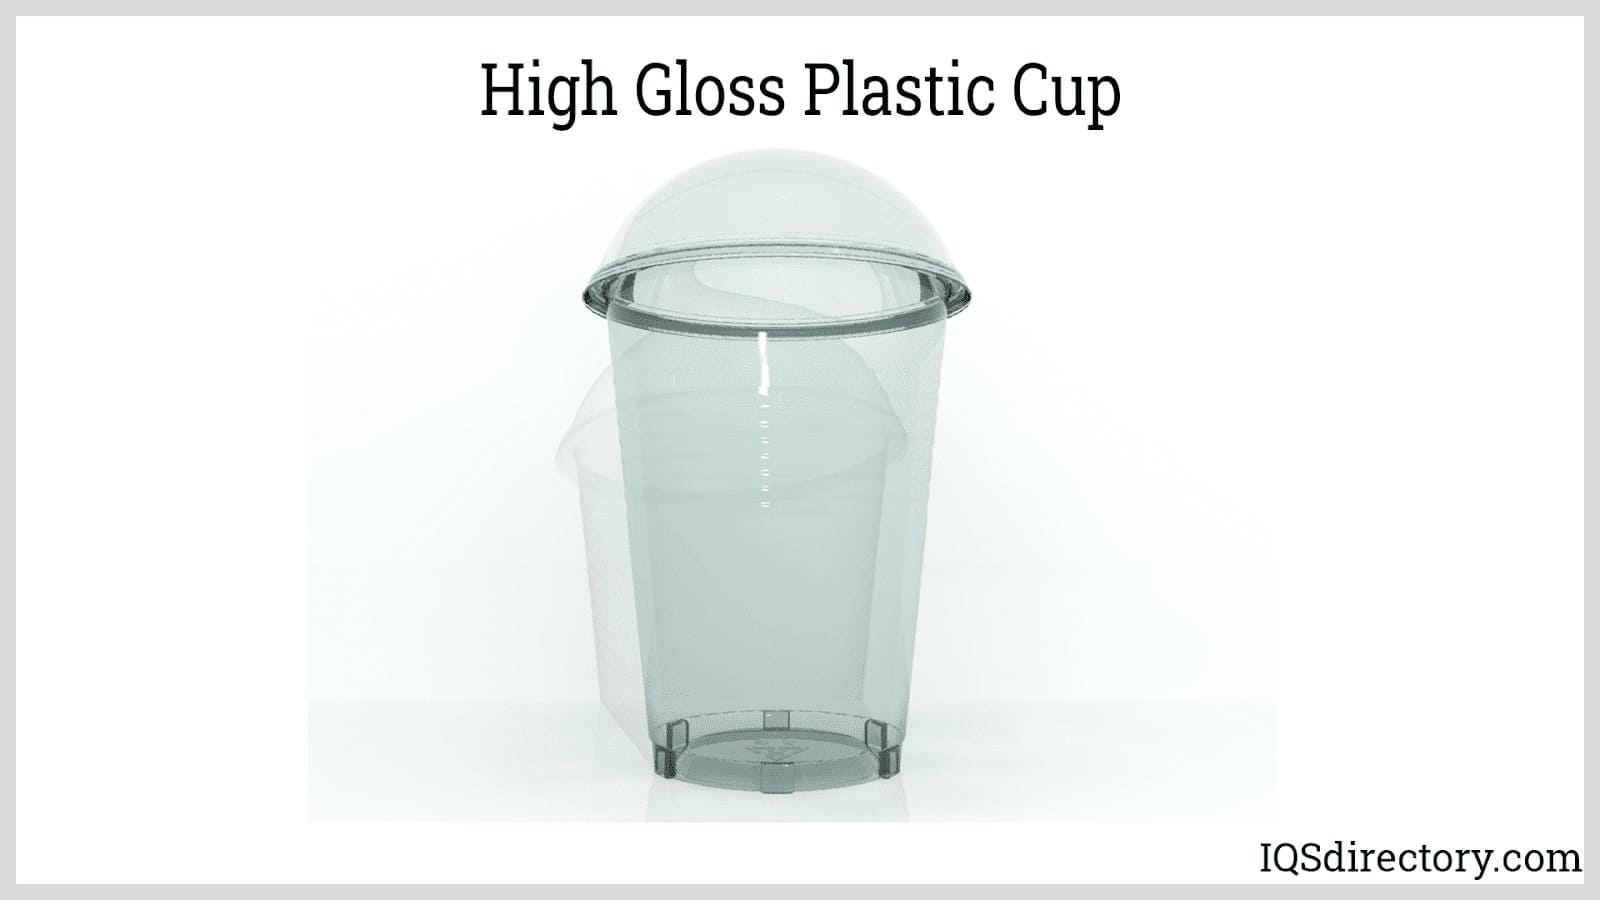 https://www.iqsdirectory.com/articles/plastic-container/high-gloss-plastic-cup.jpg